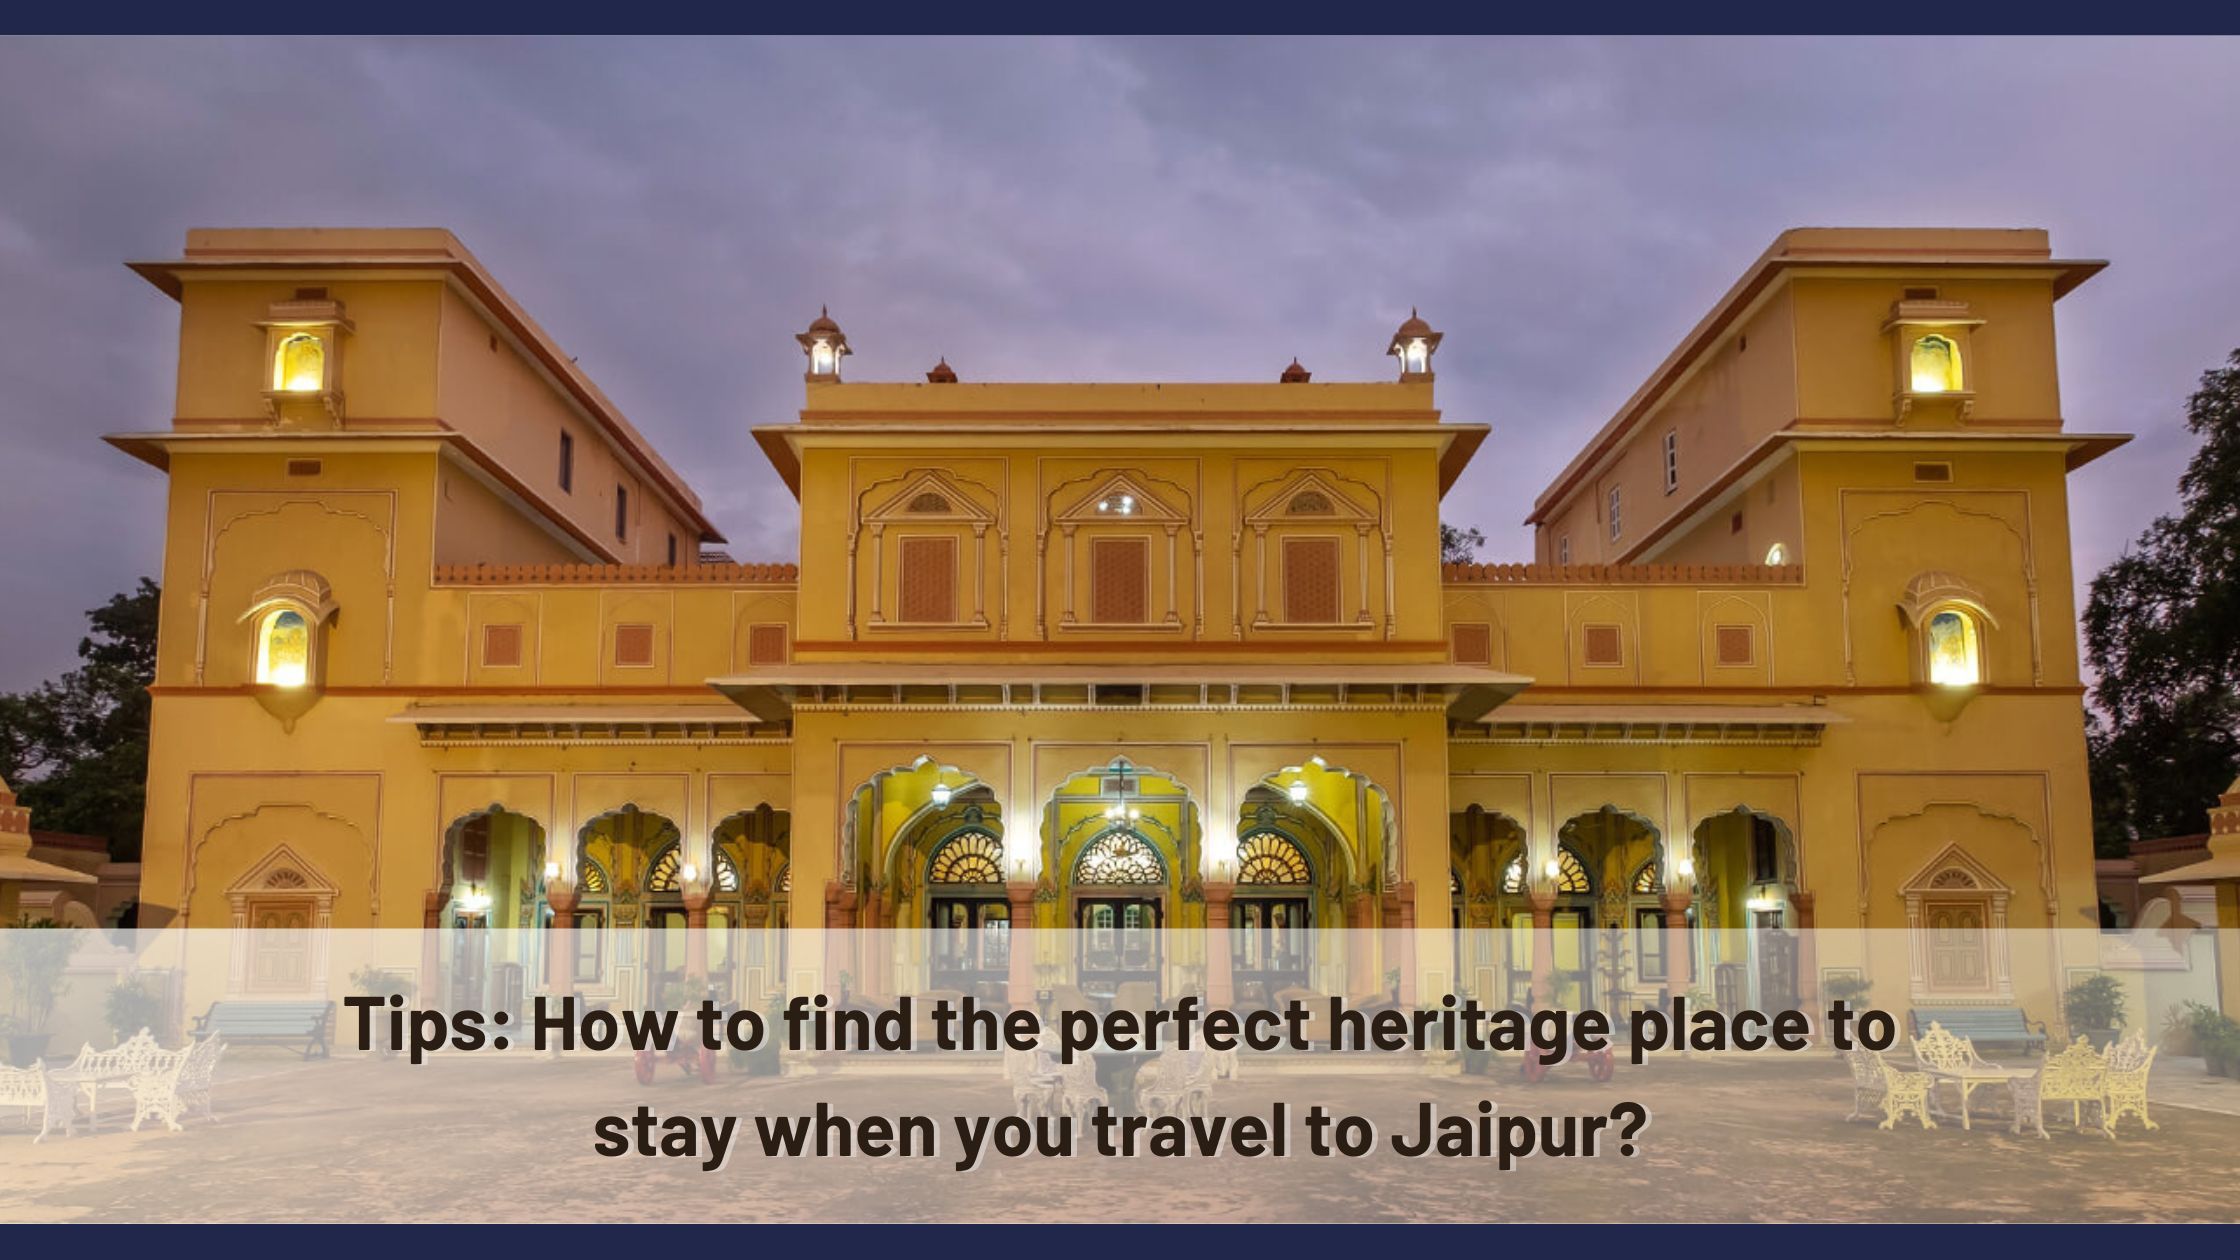 Heritage hotel to stay in Jaipur